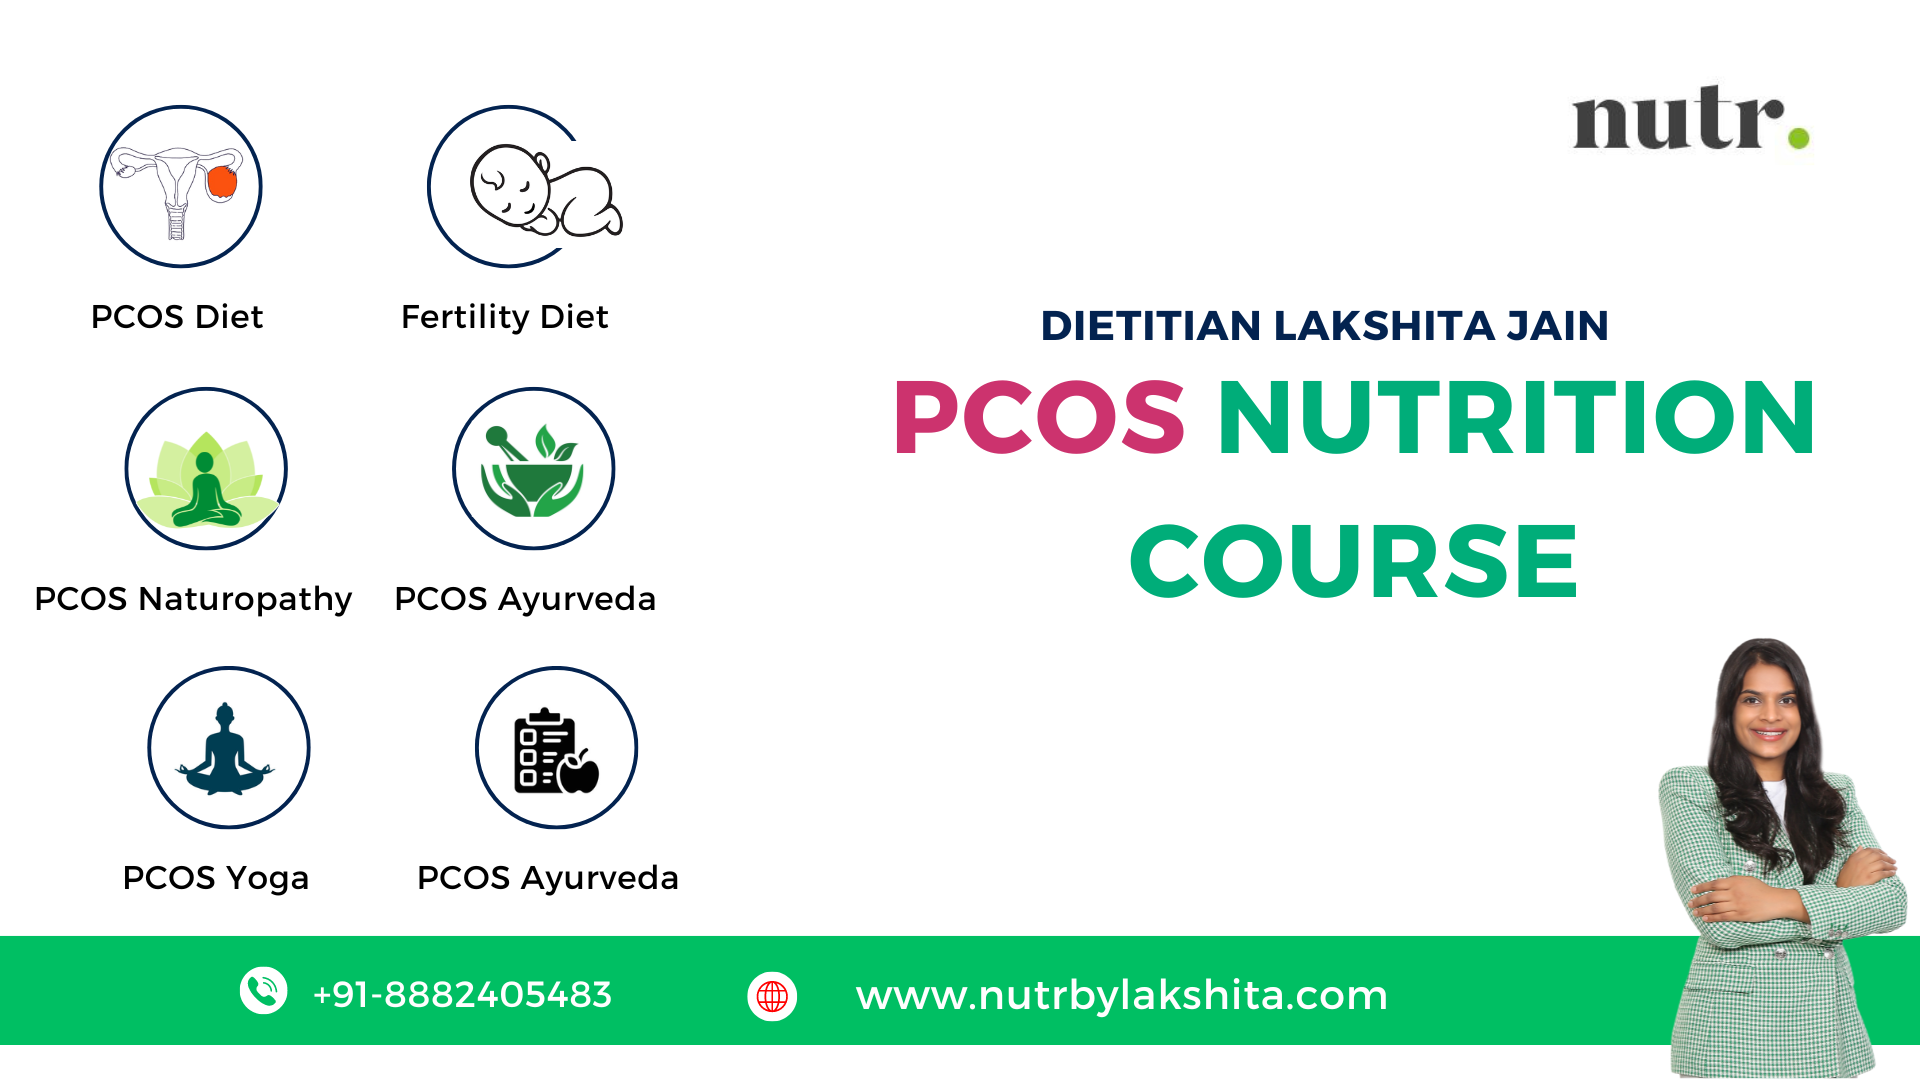 Fighting PCOS: PCOS Nutrition course